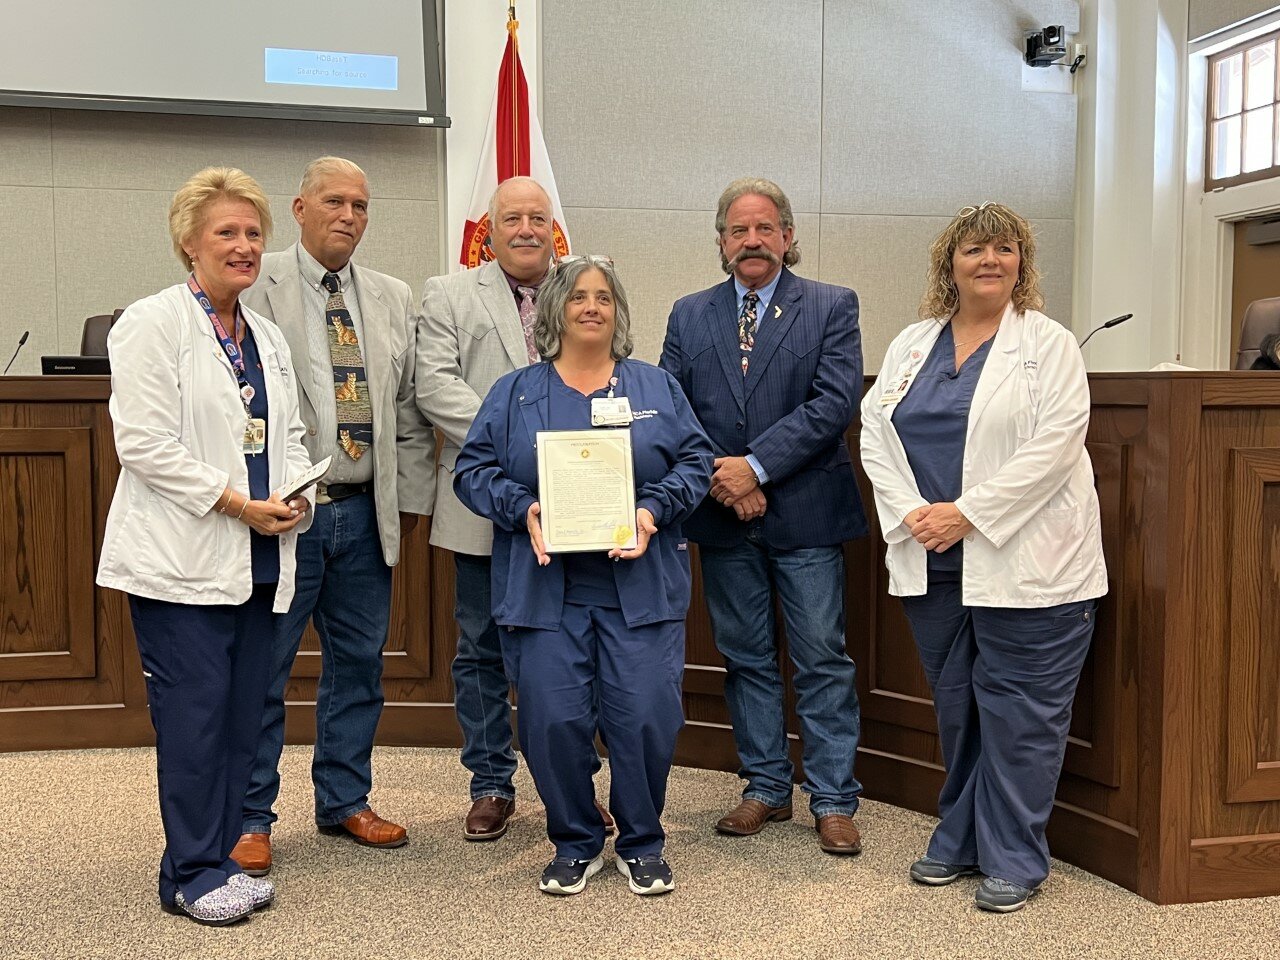 OKEECHOBEE -- Raulerson Hospital staffers were at the May 11 meeting of the Okeechobee County Commission to accept the proclamation for Stroke Prevention Awareness.